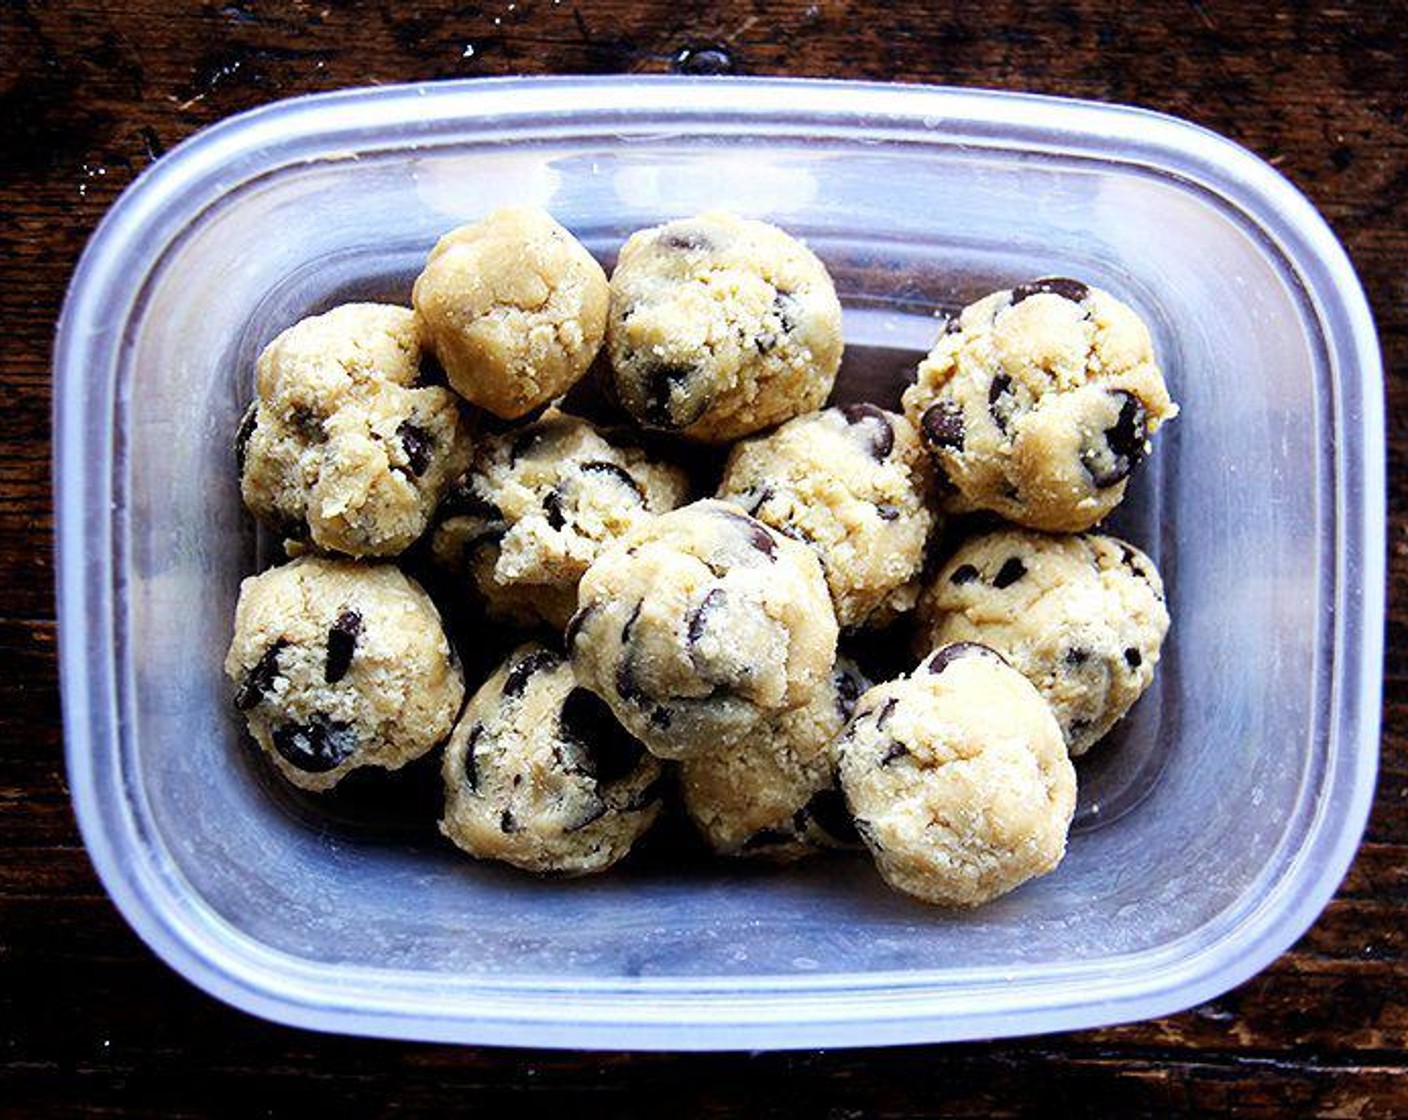 step 3 Portion into 1¾ oz (48 g) sized balls. This is a tedious task, but it makes for beautiful and uniform cookies that bake evenly. Chill the portioned balls for at least one hour, or keep in the fridge for weeks or freeze for months.